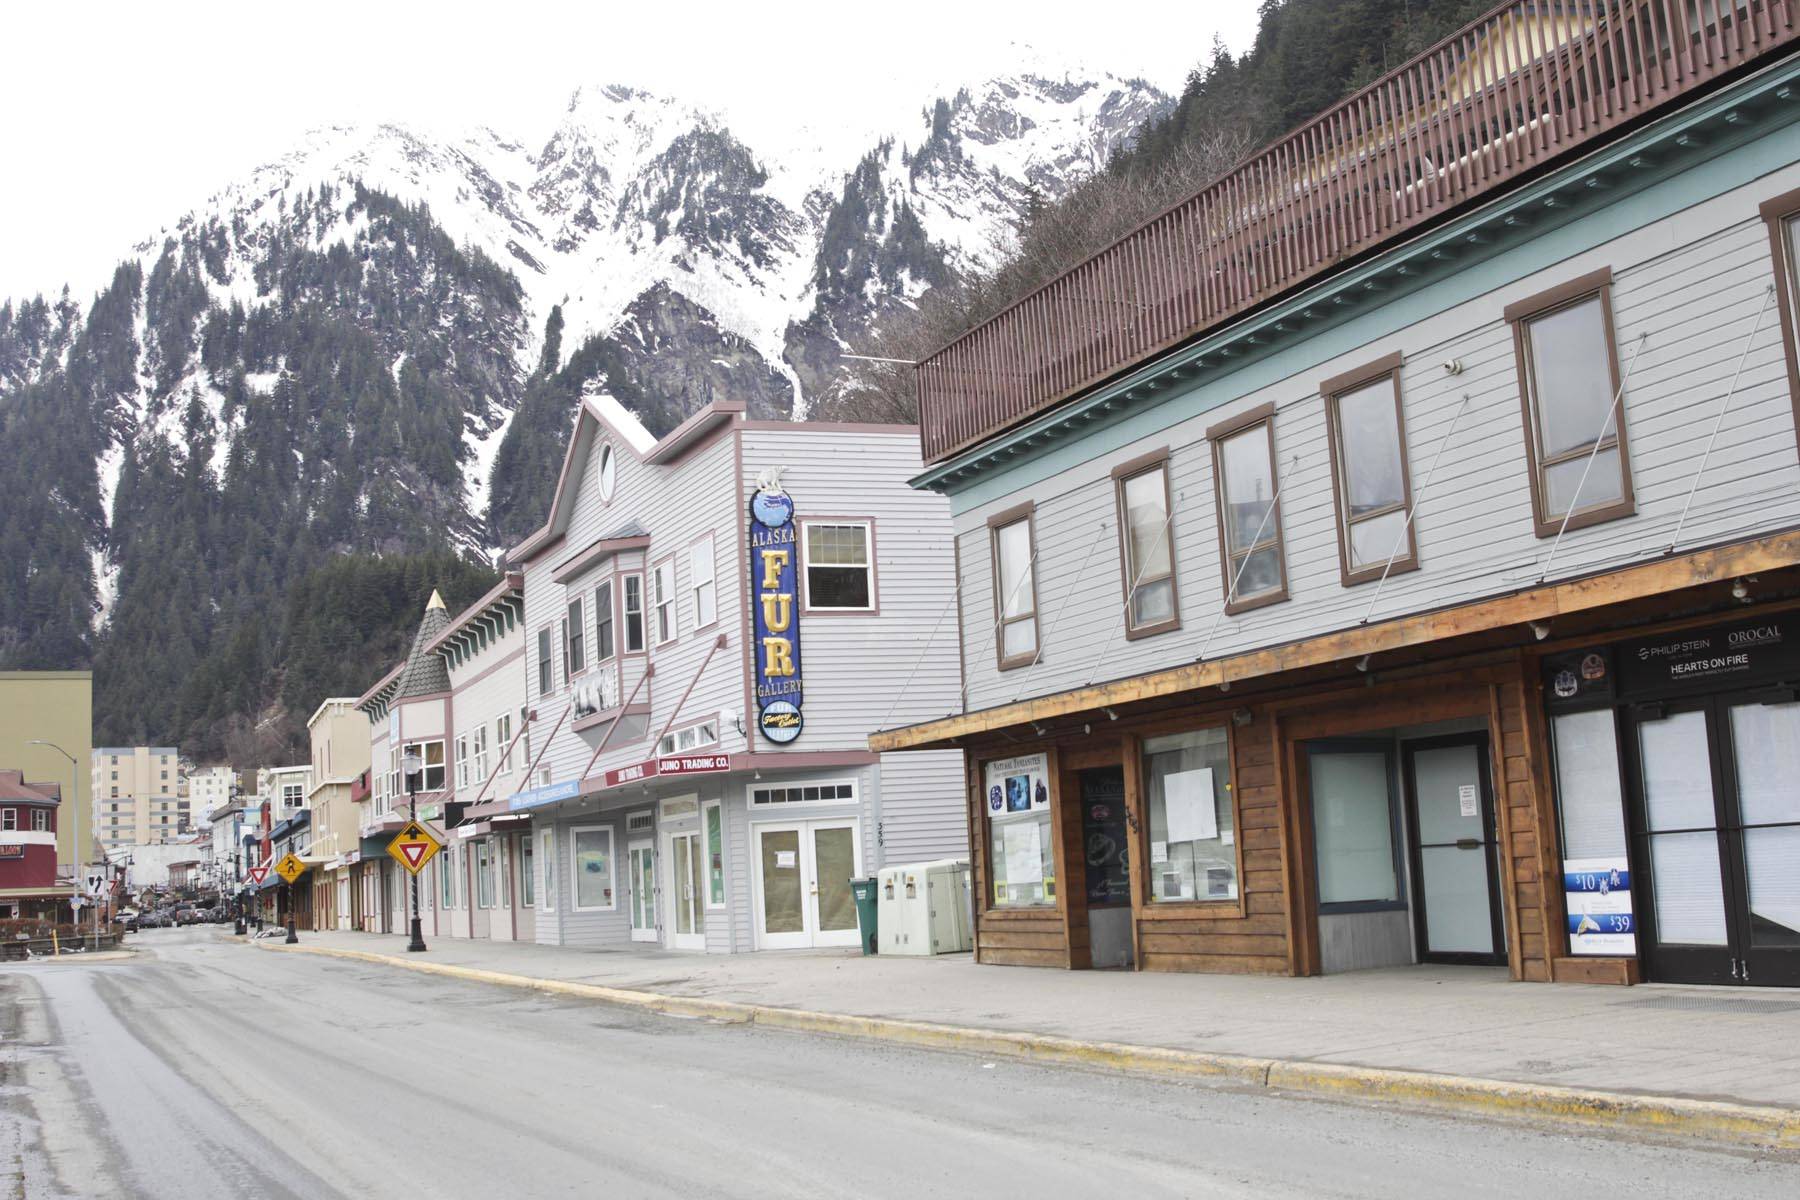 No cruises are expected until July at the earliest. That means these tourist-targeted shops downtown will likely remain shuttered for months longer than usual, March 20, 2020. (Michael S. Lockett | Juneau Empire)